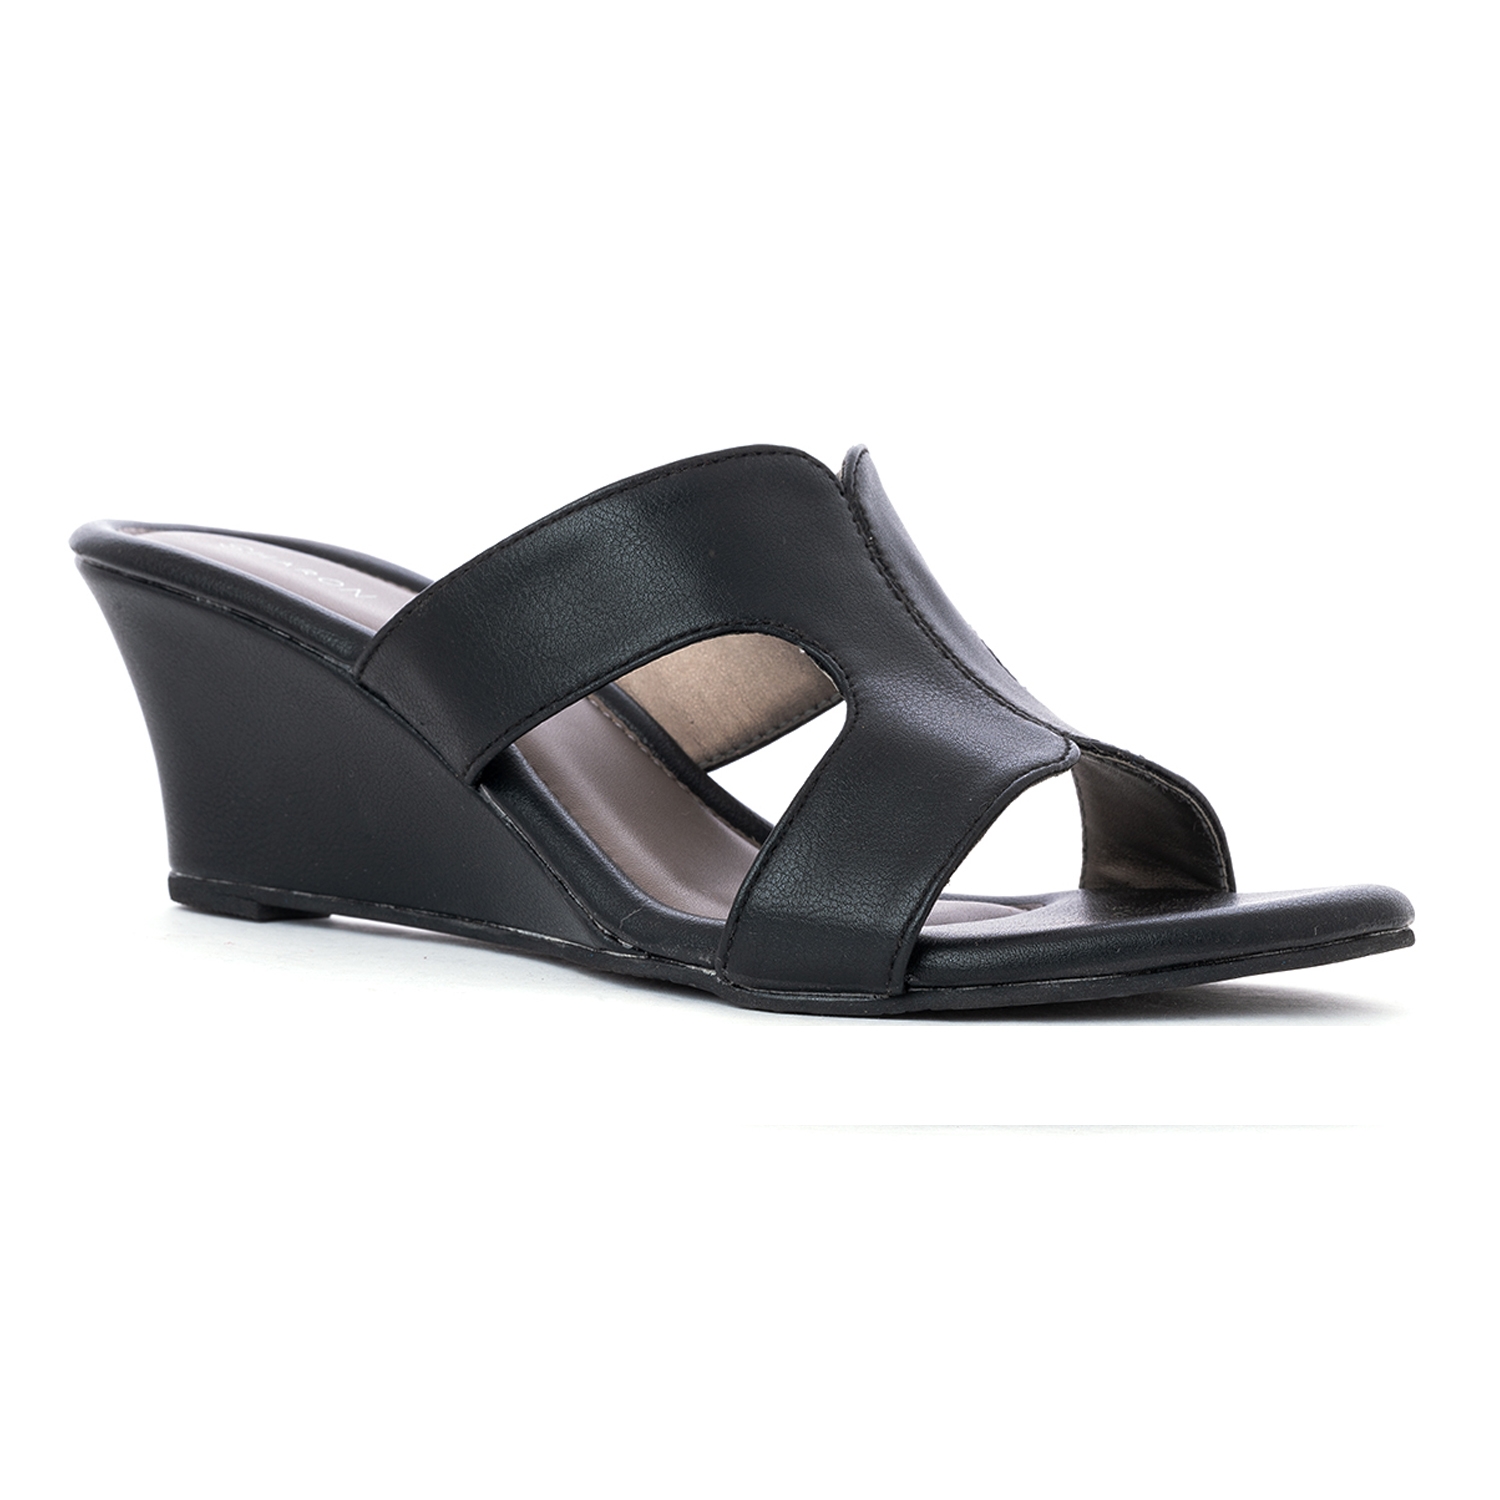 Khadim's Black Colour Slip On / Heels having Synthetic Upper Material - Casual Use for Women ( Size : 3 )